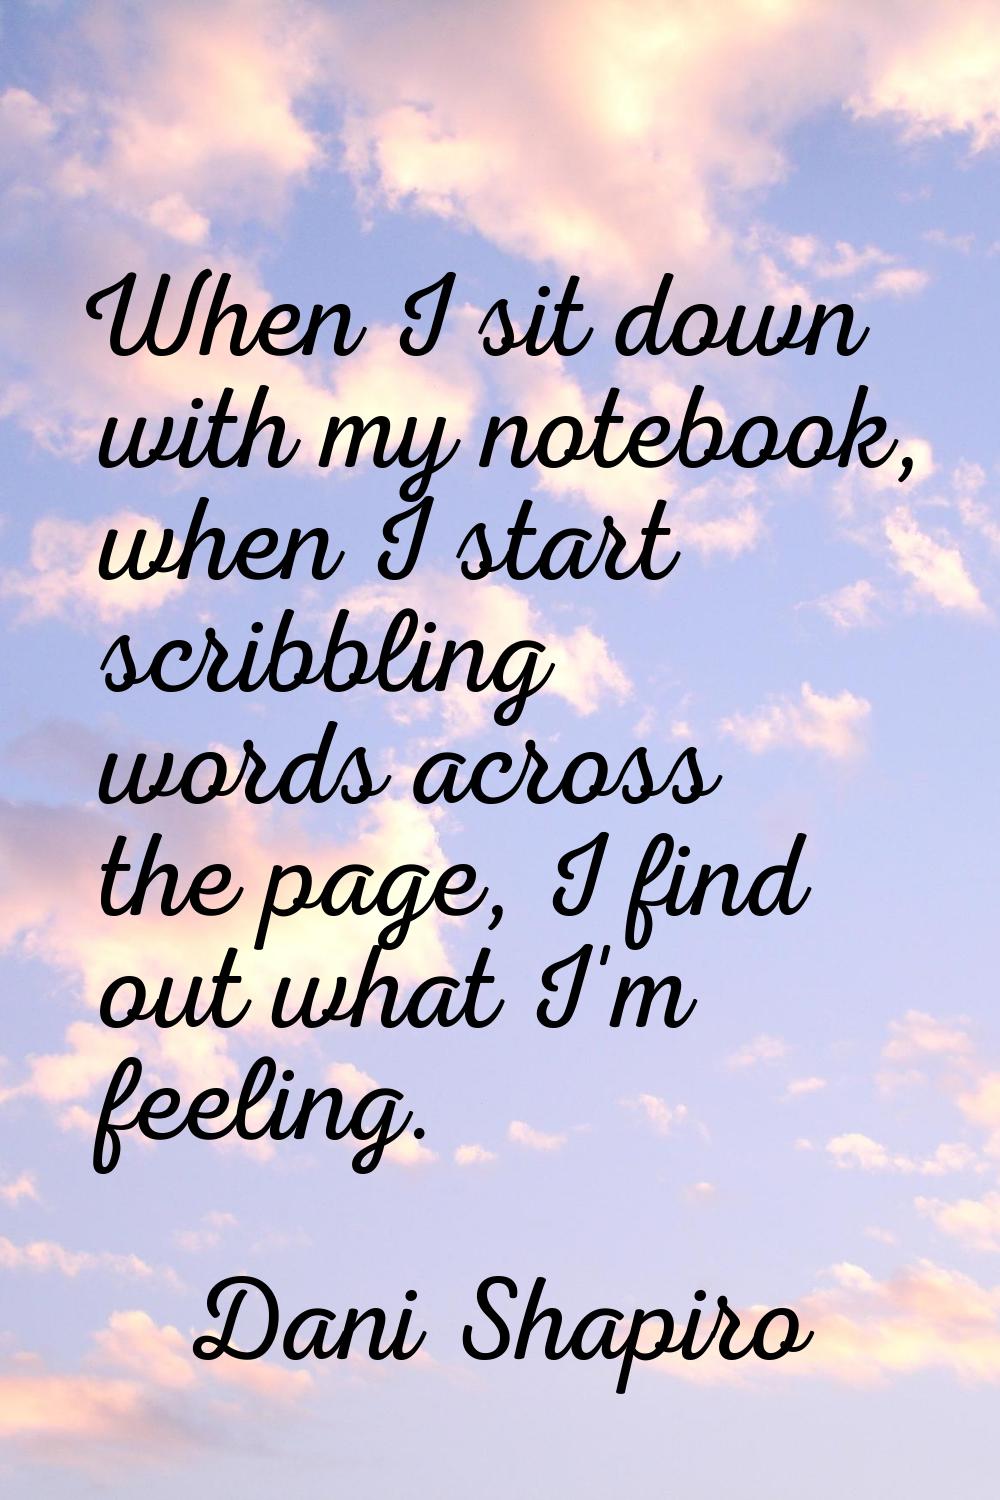 When I sit down with my notebook, when I start scribbling words across the page, I find out what I'